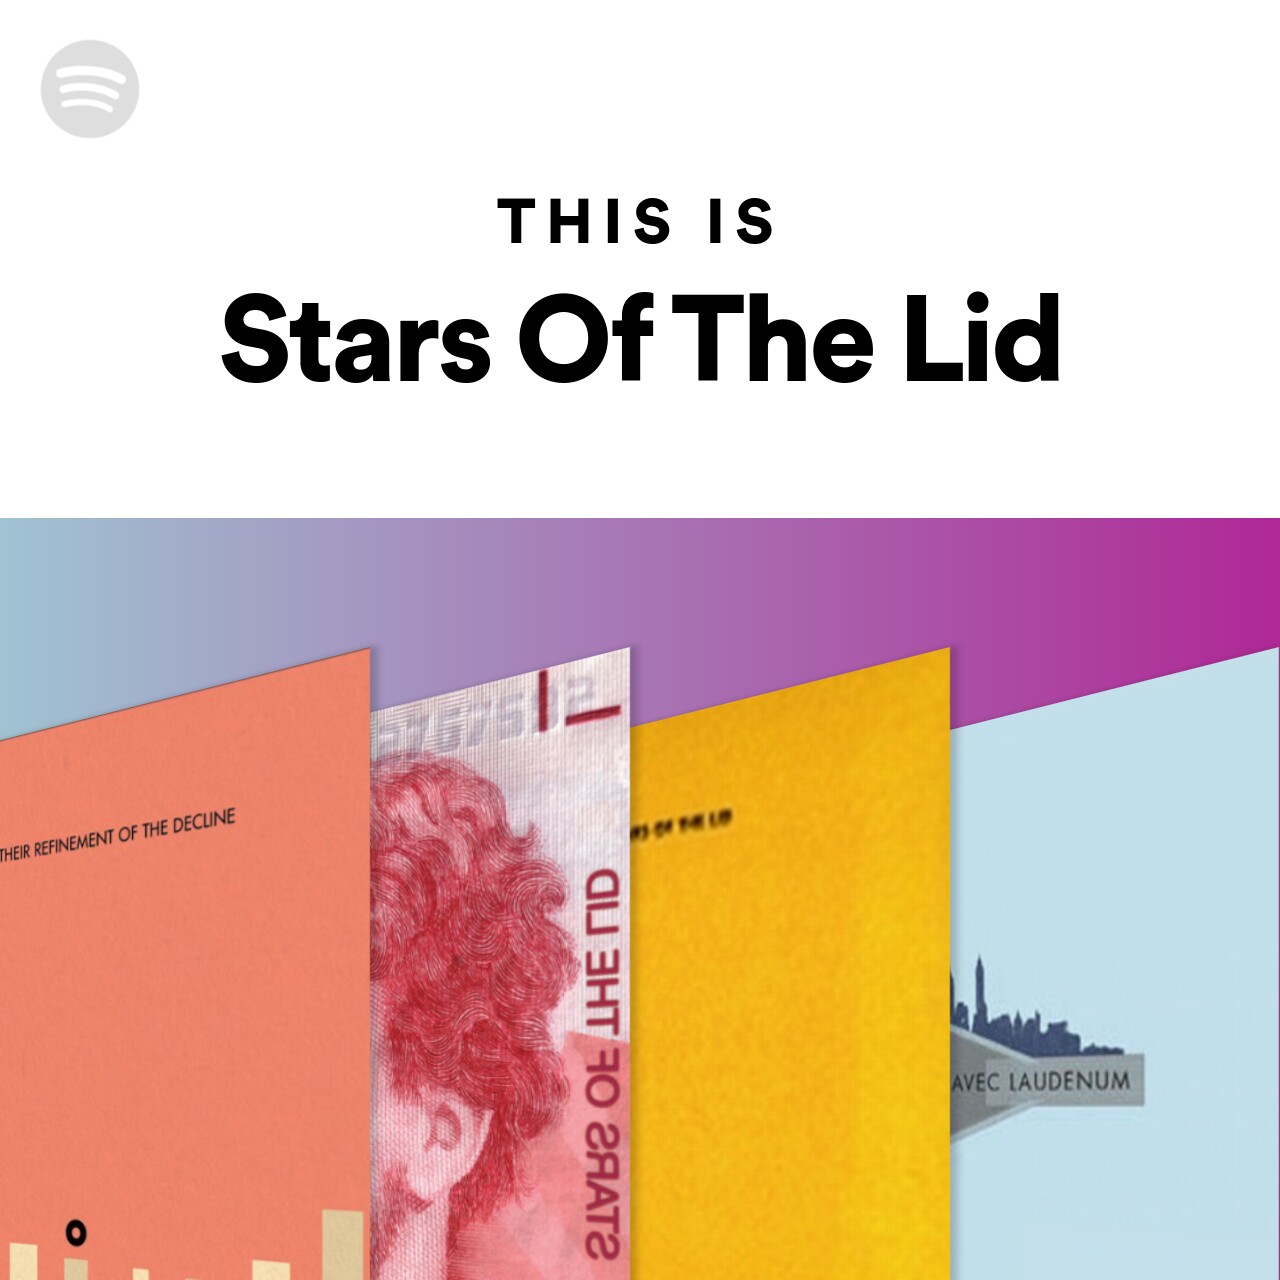 This Is Stars Of The Lid